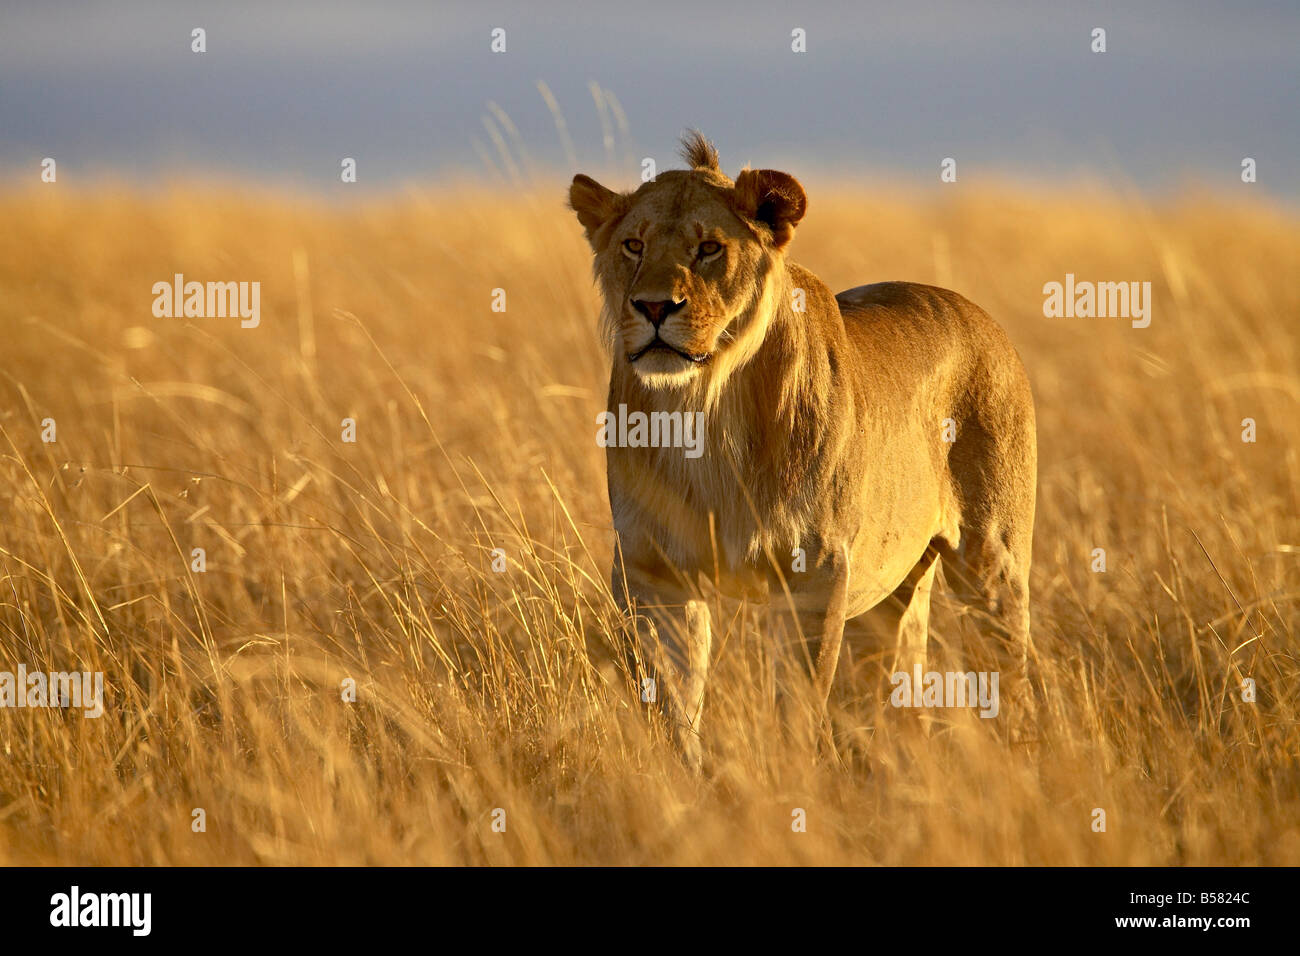 Young male lion (Panthera leo) in early morning light, Masai Mara National Reserve, Kenya, East Africa, Africa Stock Photo